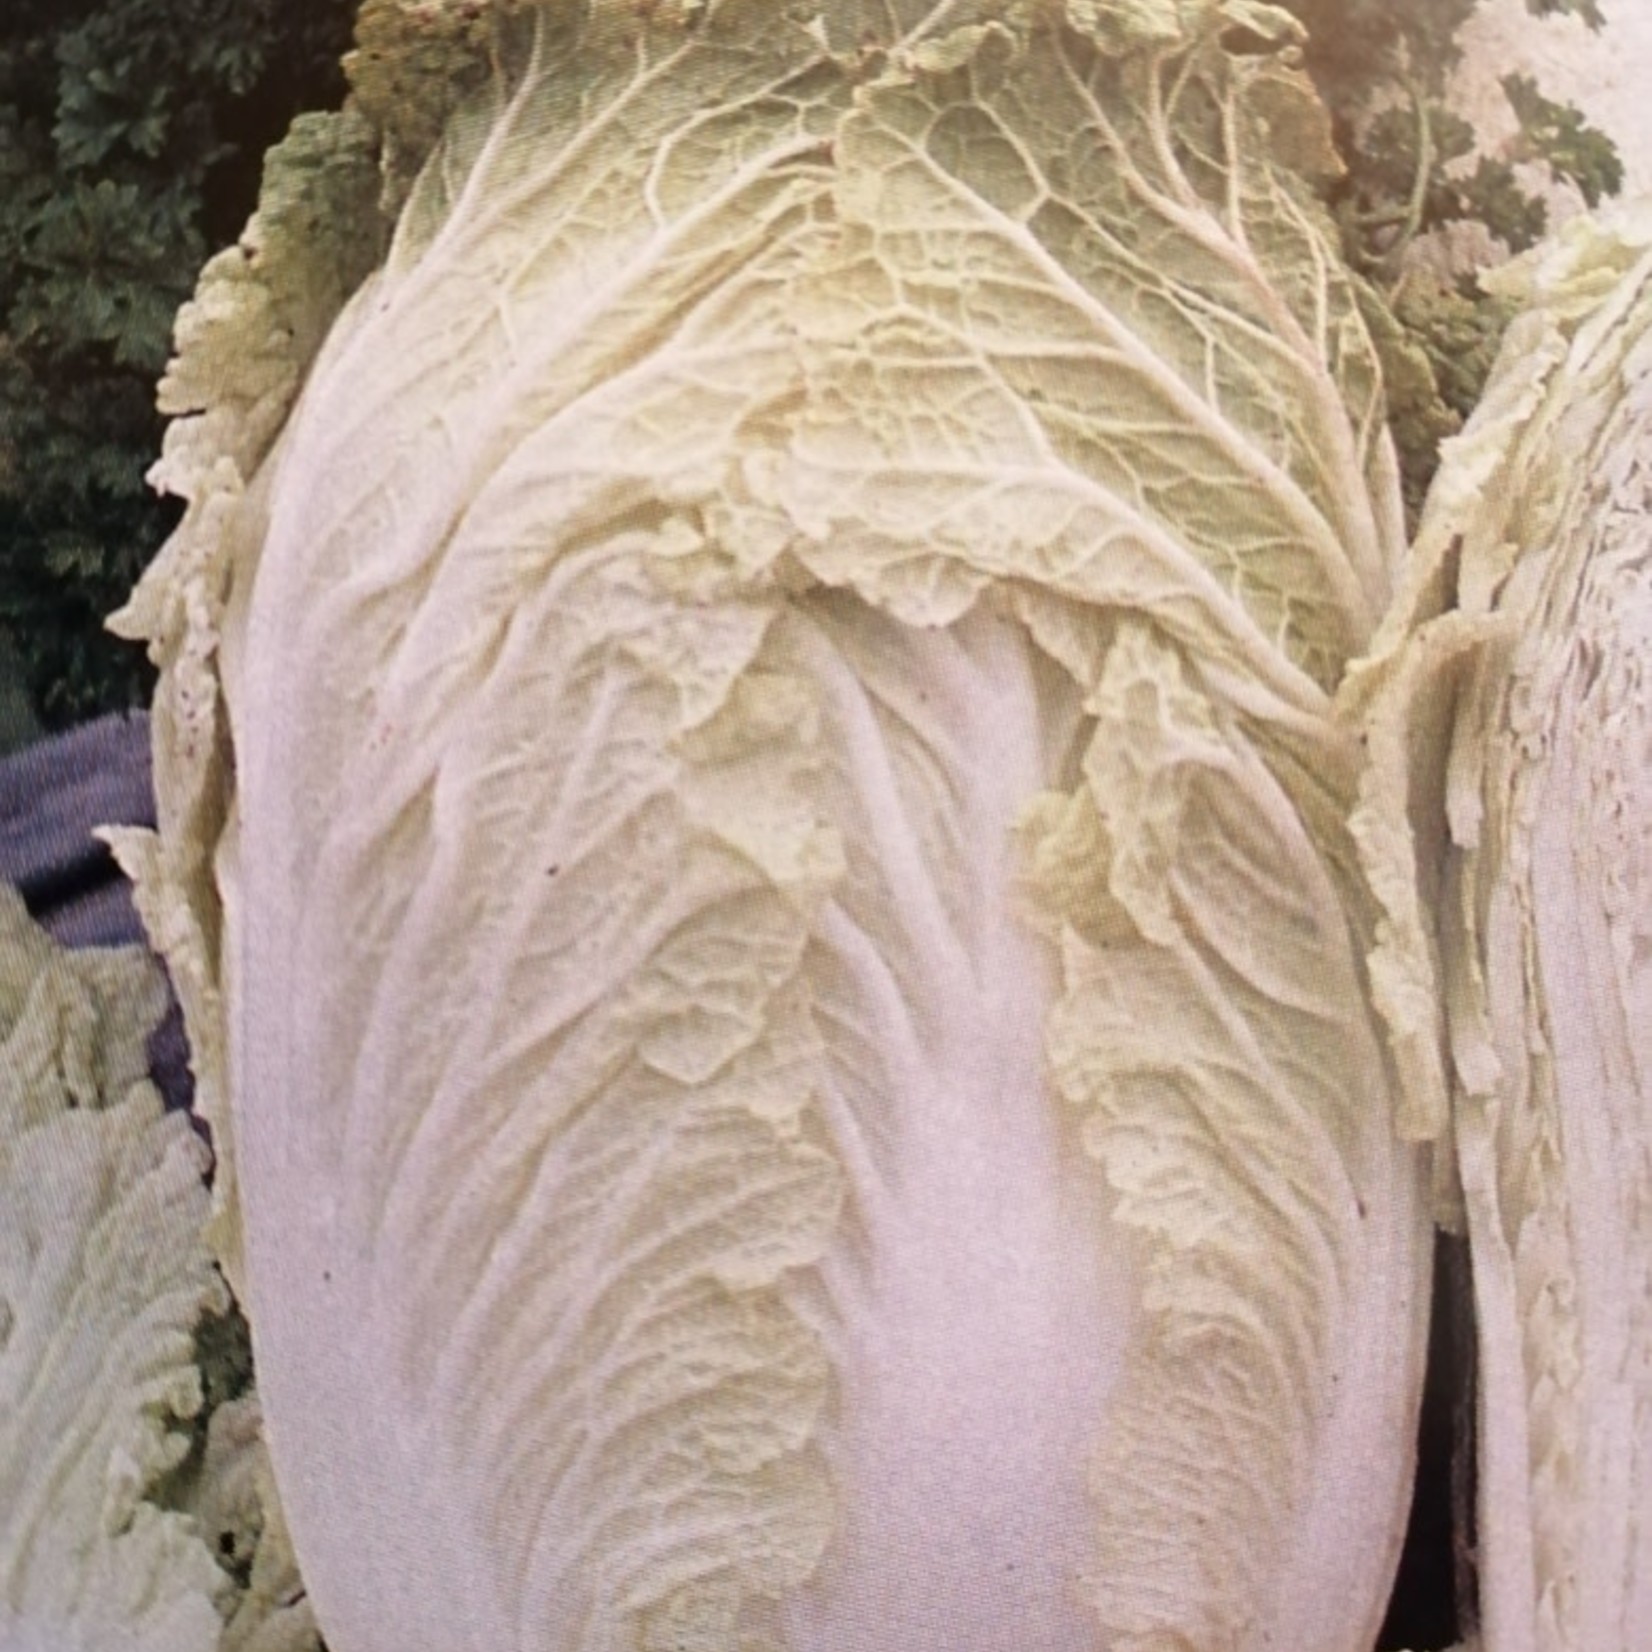 Cabbage (seed pkg)